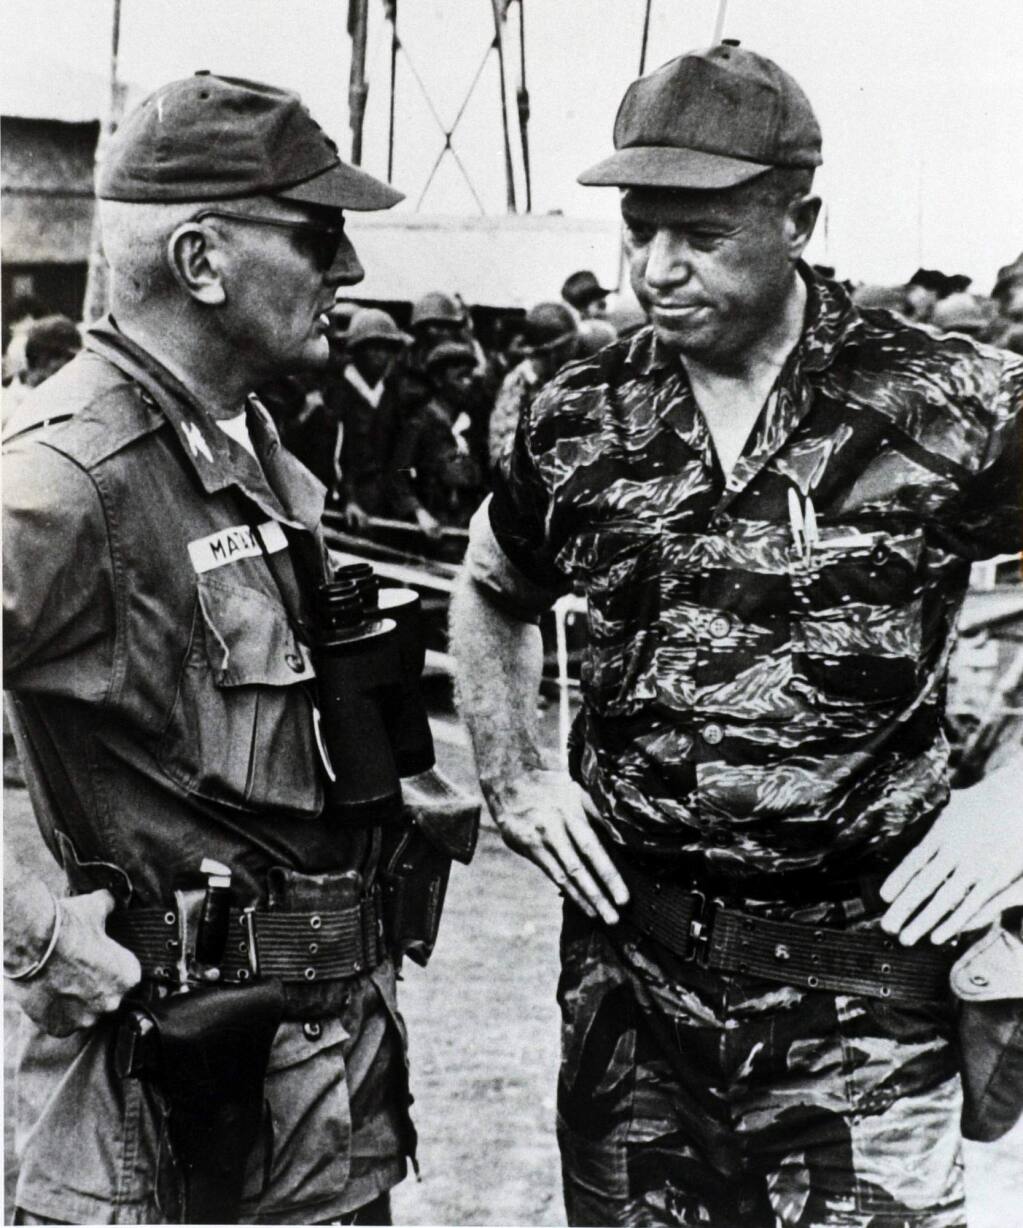 After a week-long siege by Vietcong on a special forces camp in the Vietnam Highlands in 1965, Frank McCulloch, right, talks with the colonel commanding the zone while on assignment for Time-Life.3/9/2003: D6: Following a weeklong siege by Viet Cong on a Special Forces camp in the highlands of Vietnam in 1965, Frank McCulloch, right, talks with a colonel commanding the zone while on assignment for Time magazine.